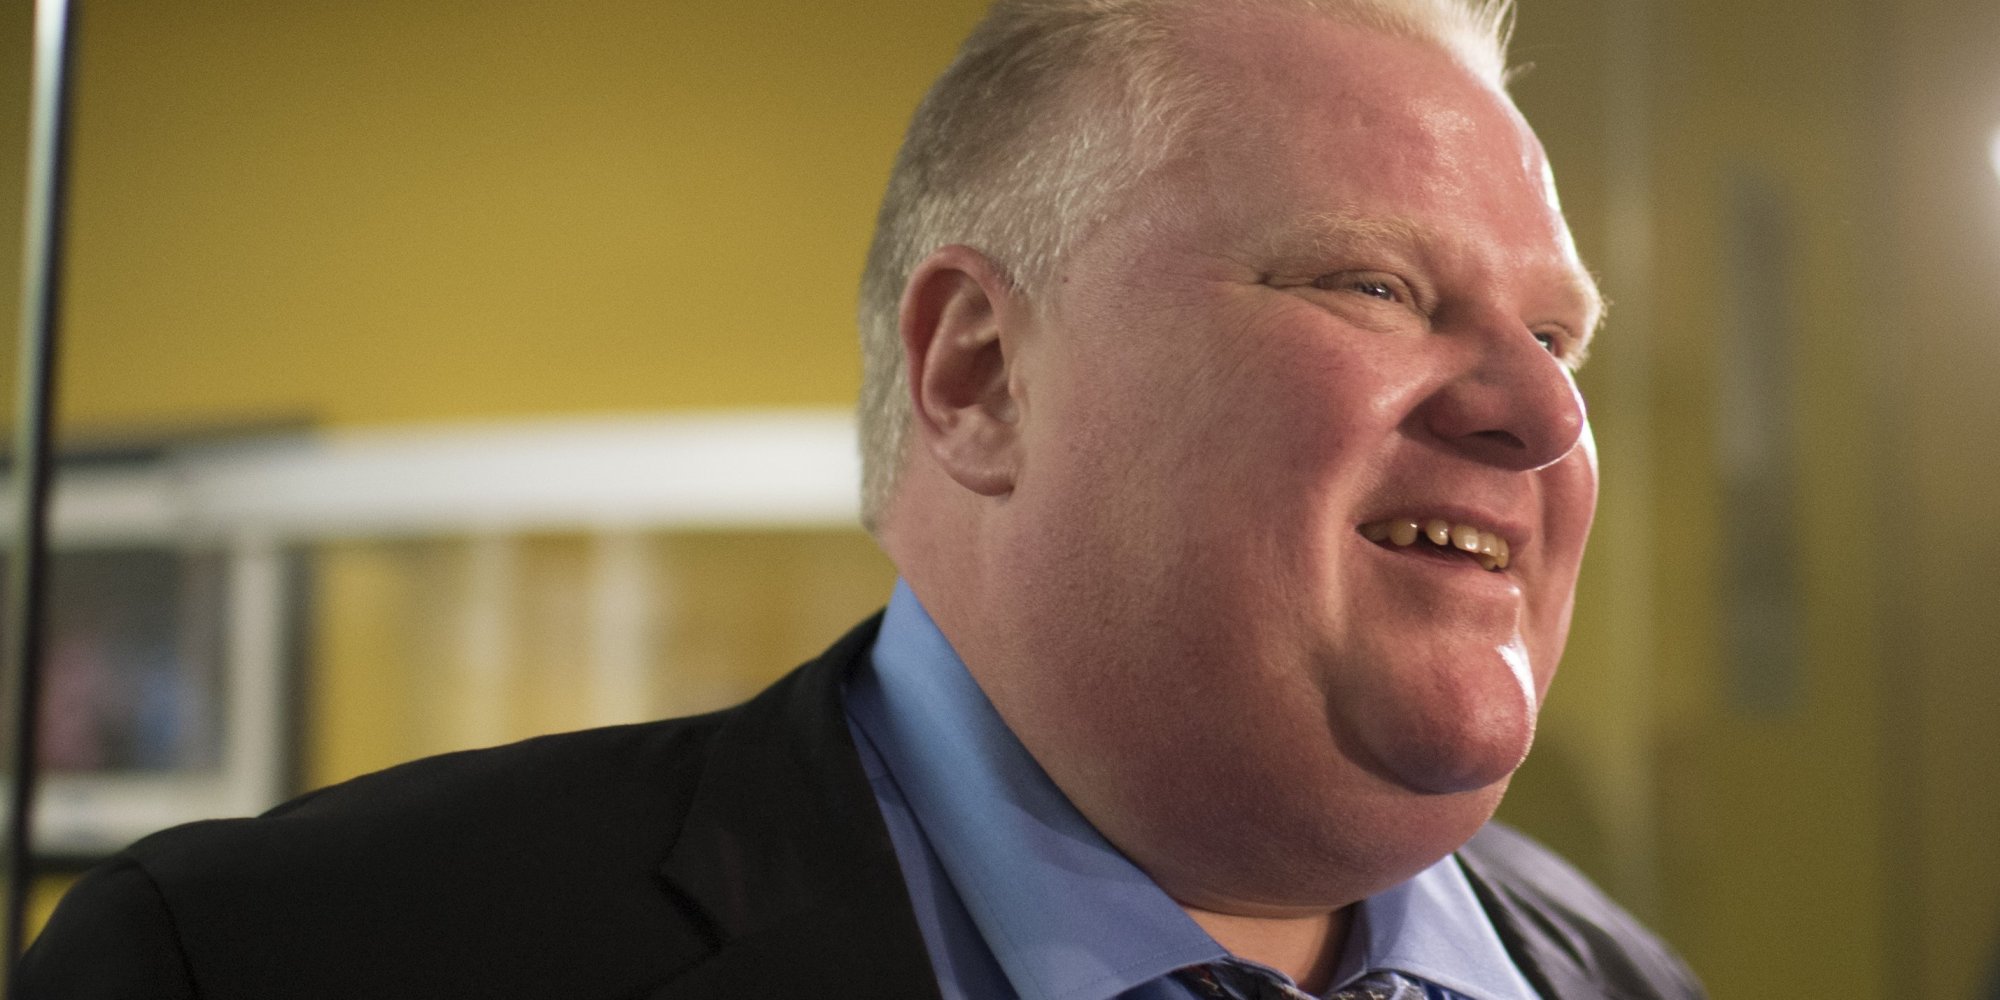 Mayor ford wants to be prime minister #4